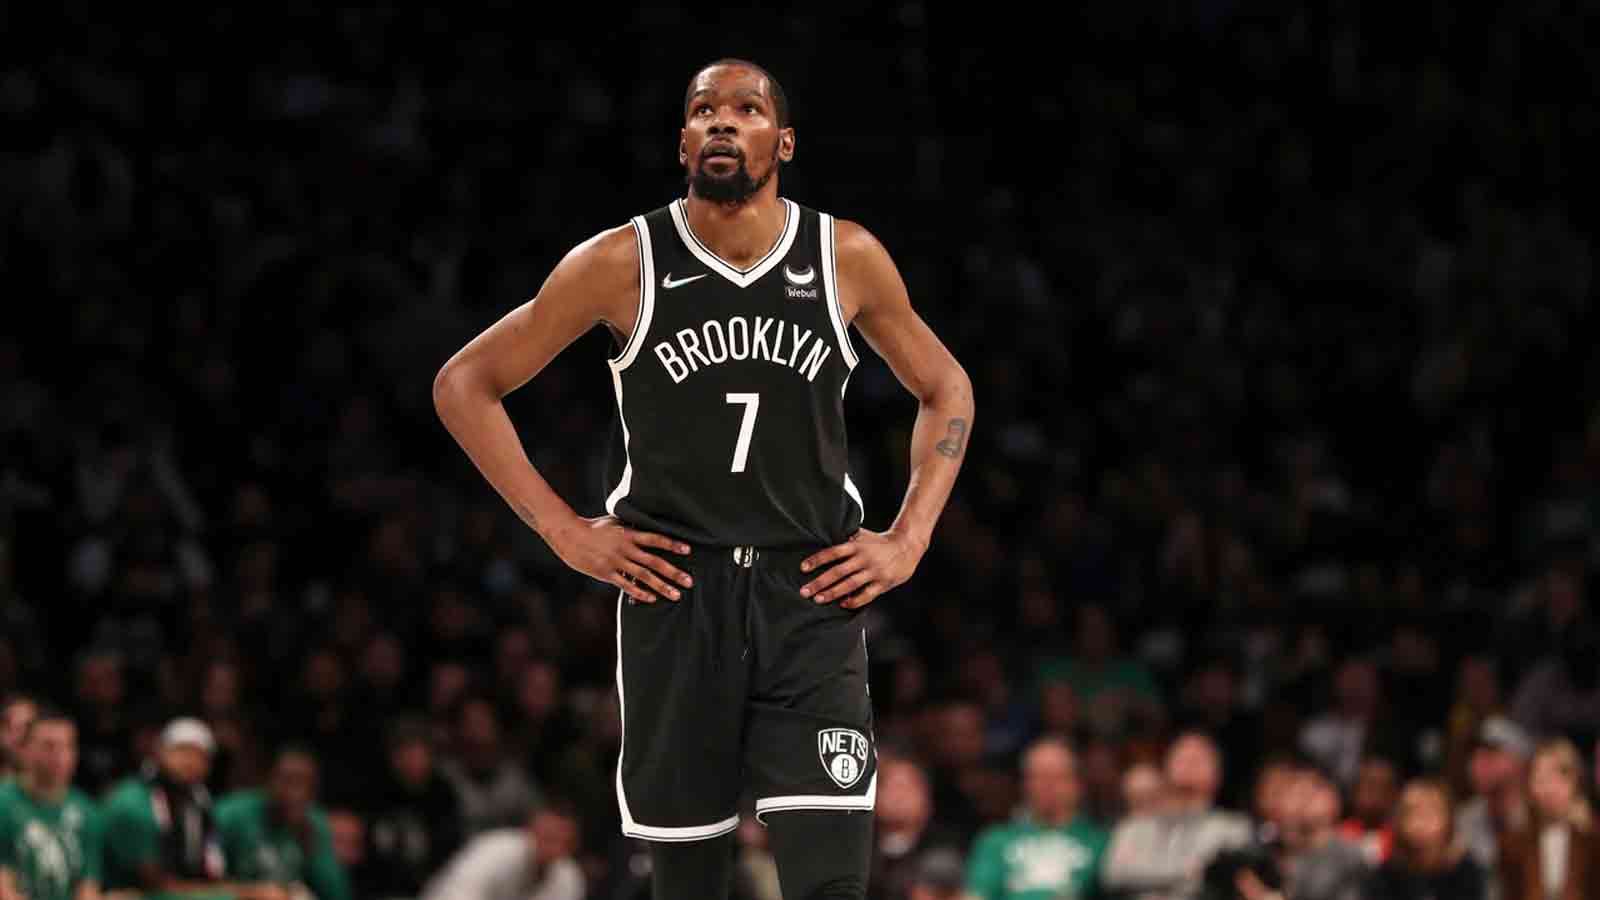 In the 2021-22 NBA season the Philadelphia 76ers traded this first round, first pick player to the Brooklyn Nets?